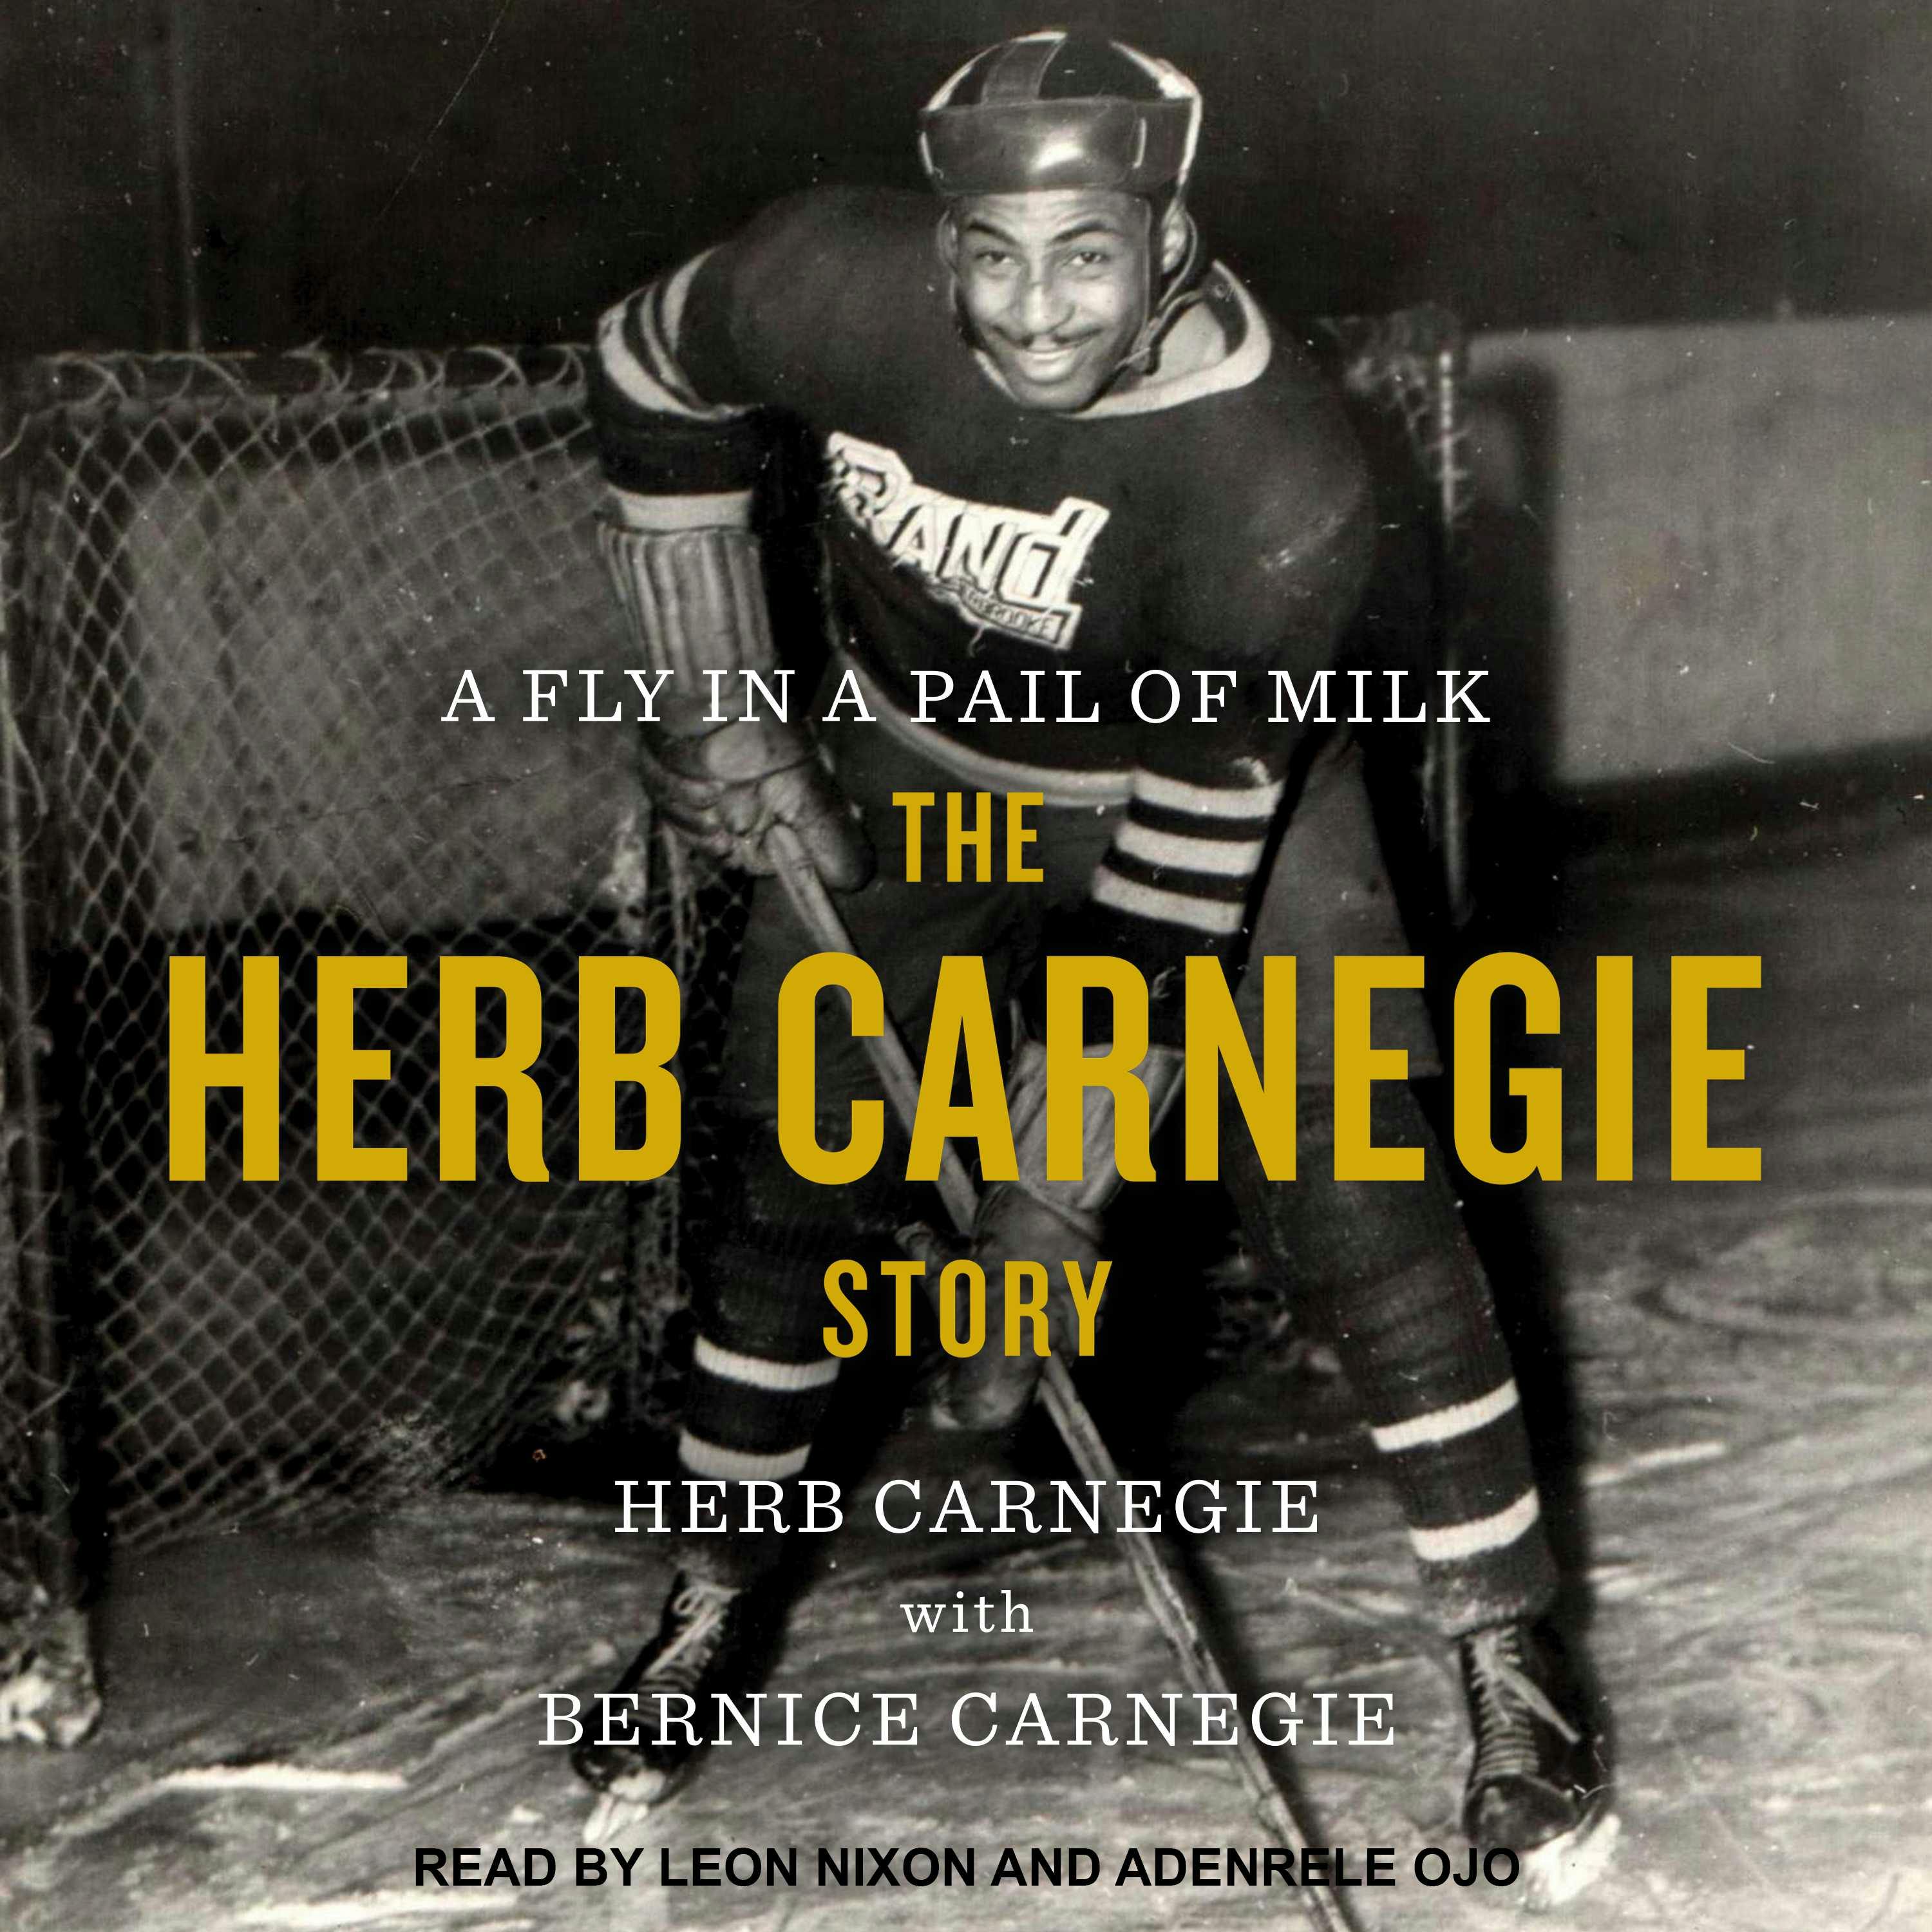 A Fly in a Pail of Milk: The Herb Carnegie Story - Herb Carnegie, Bernice Carnegie